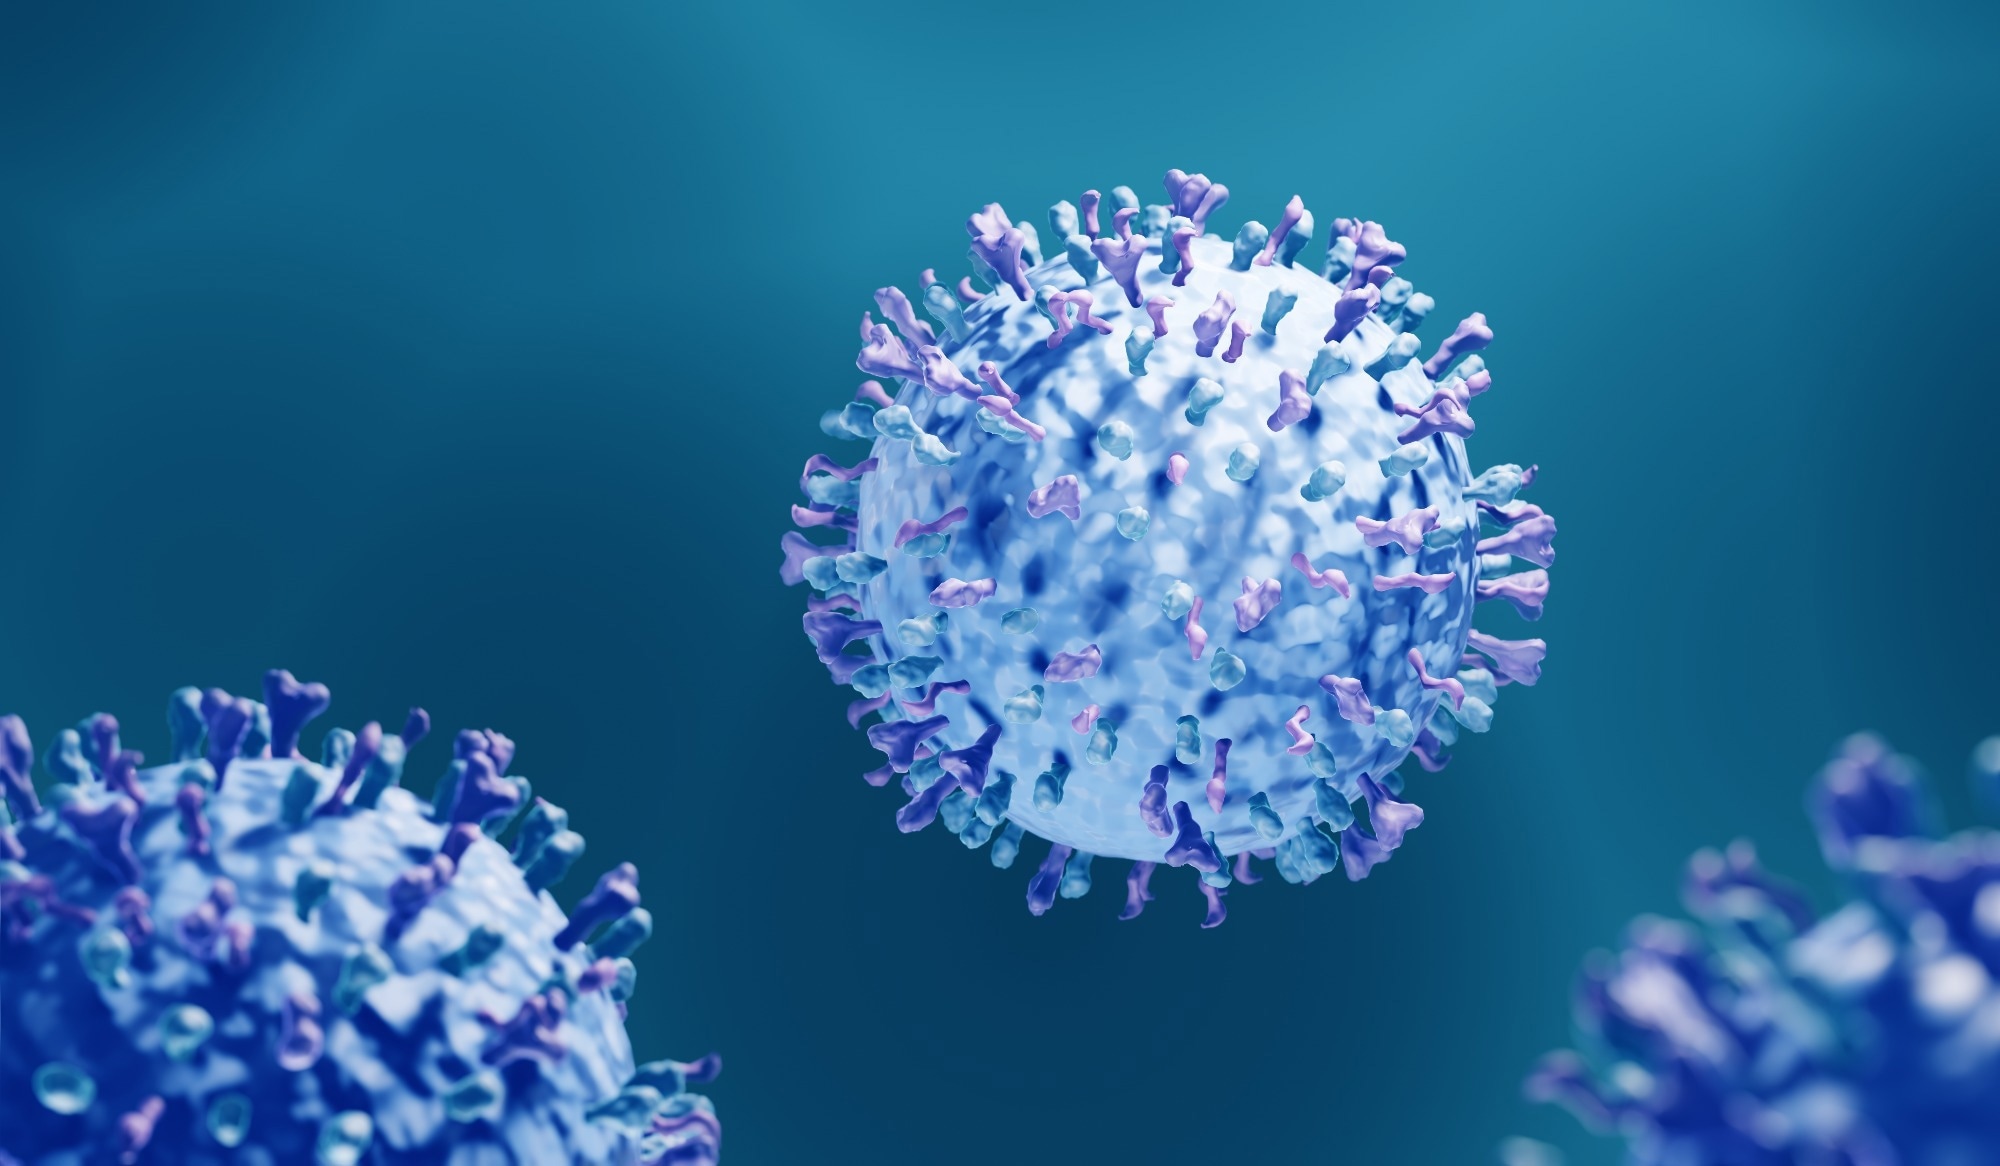 Study: Cost-effectiveness of respiratory syncytial virus preventive interventions in children: a model comparison study. Image Credit: ART-ur/Shutterstock